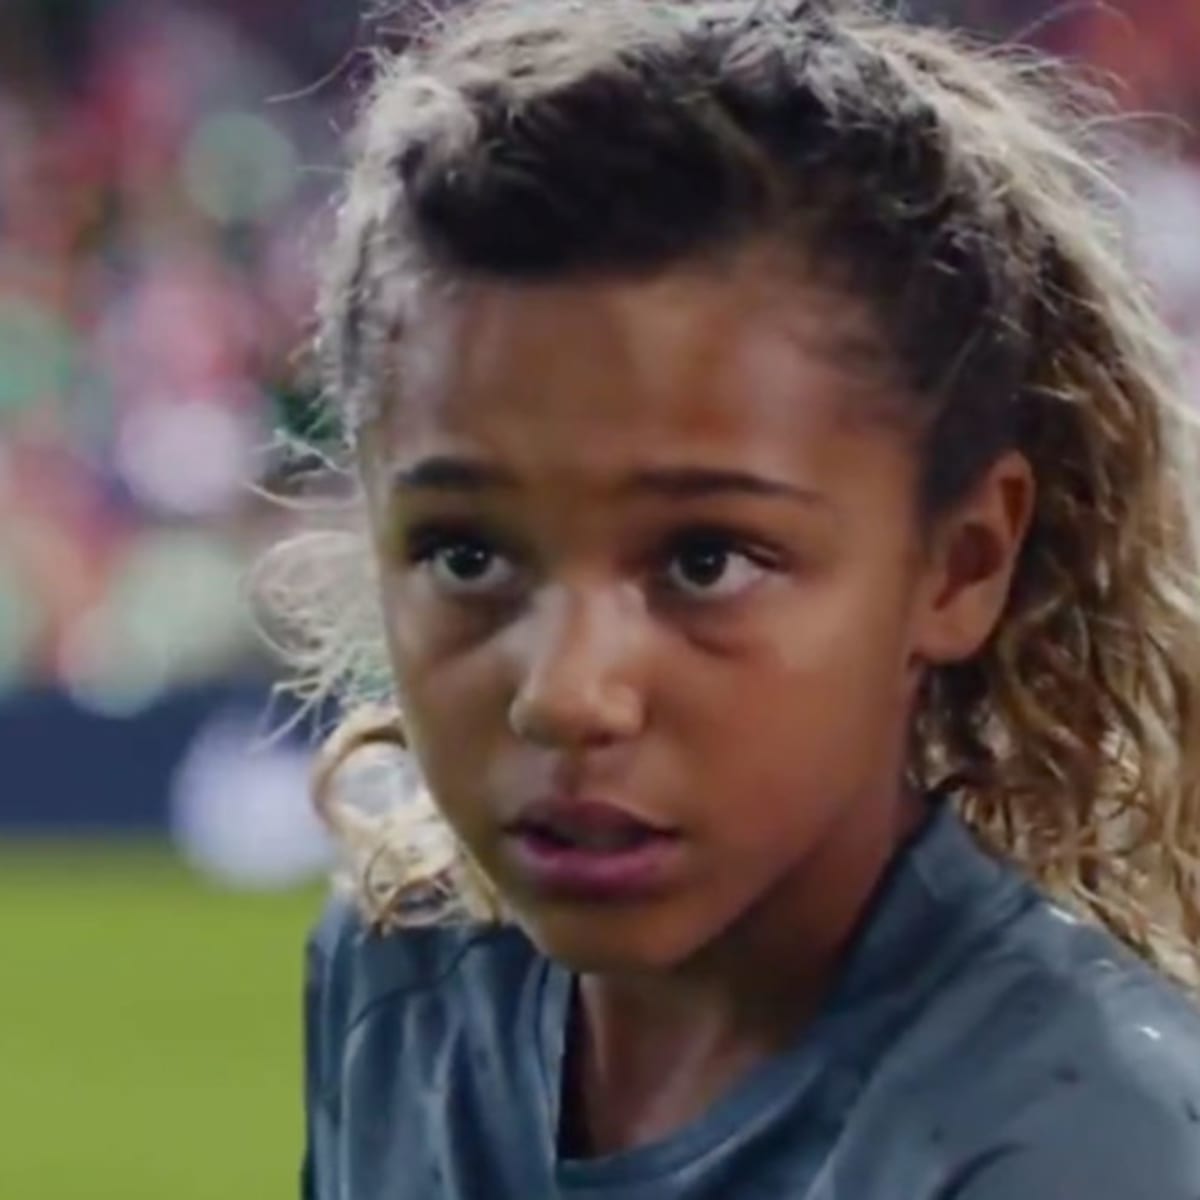 Ese Shetland Explicación Nike Women's World Cup ad empowers girls to dream further (VIDEO) - Sports  Illustrated